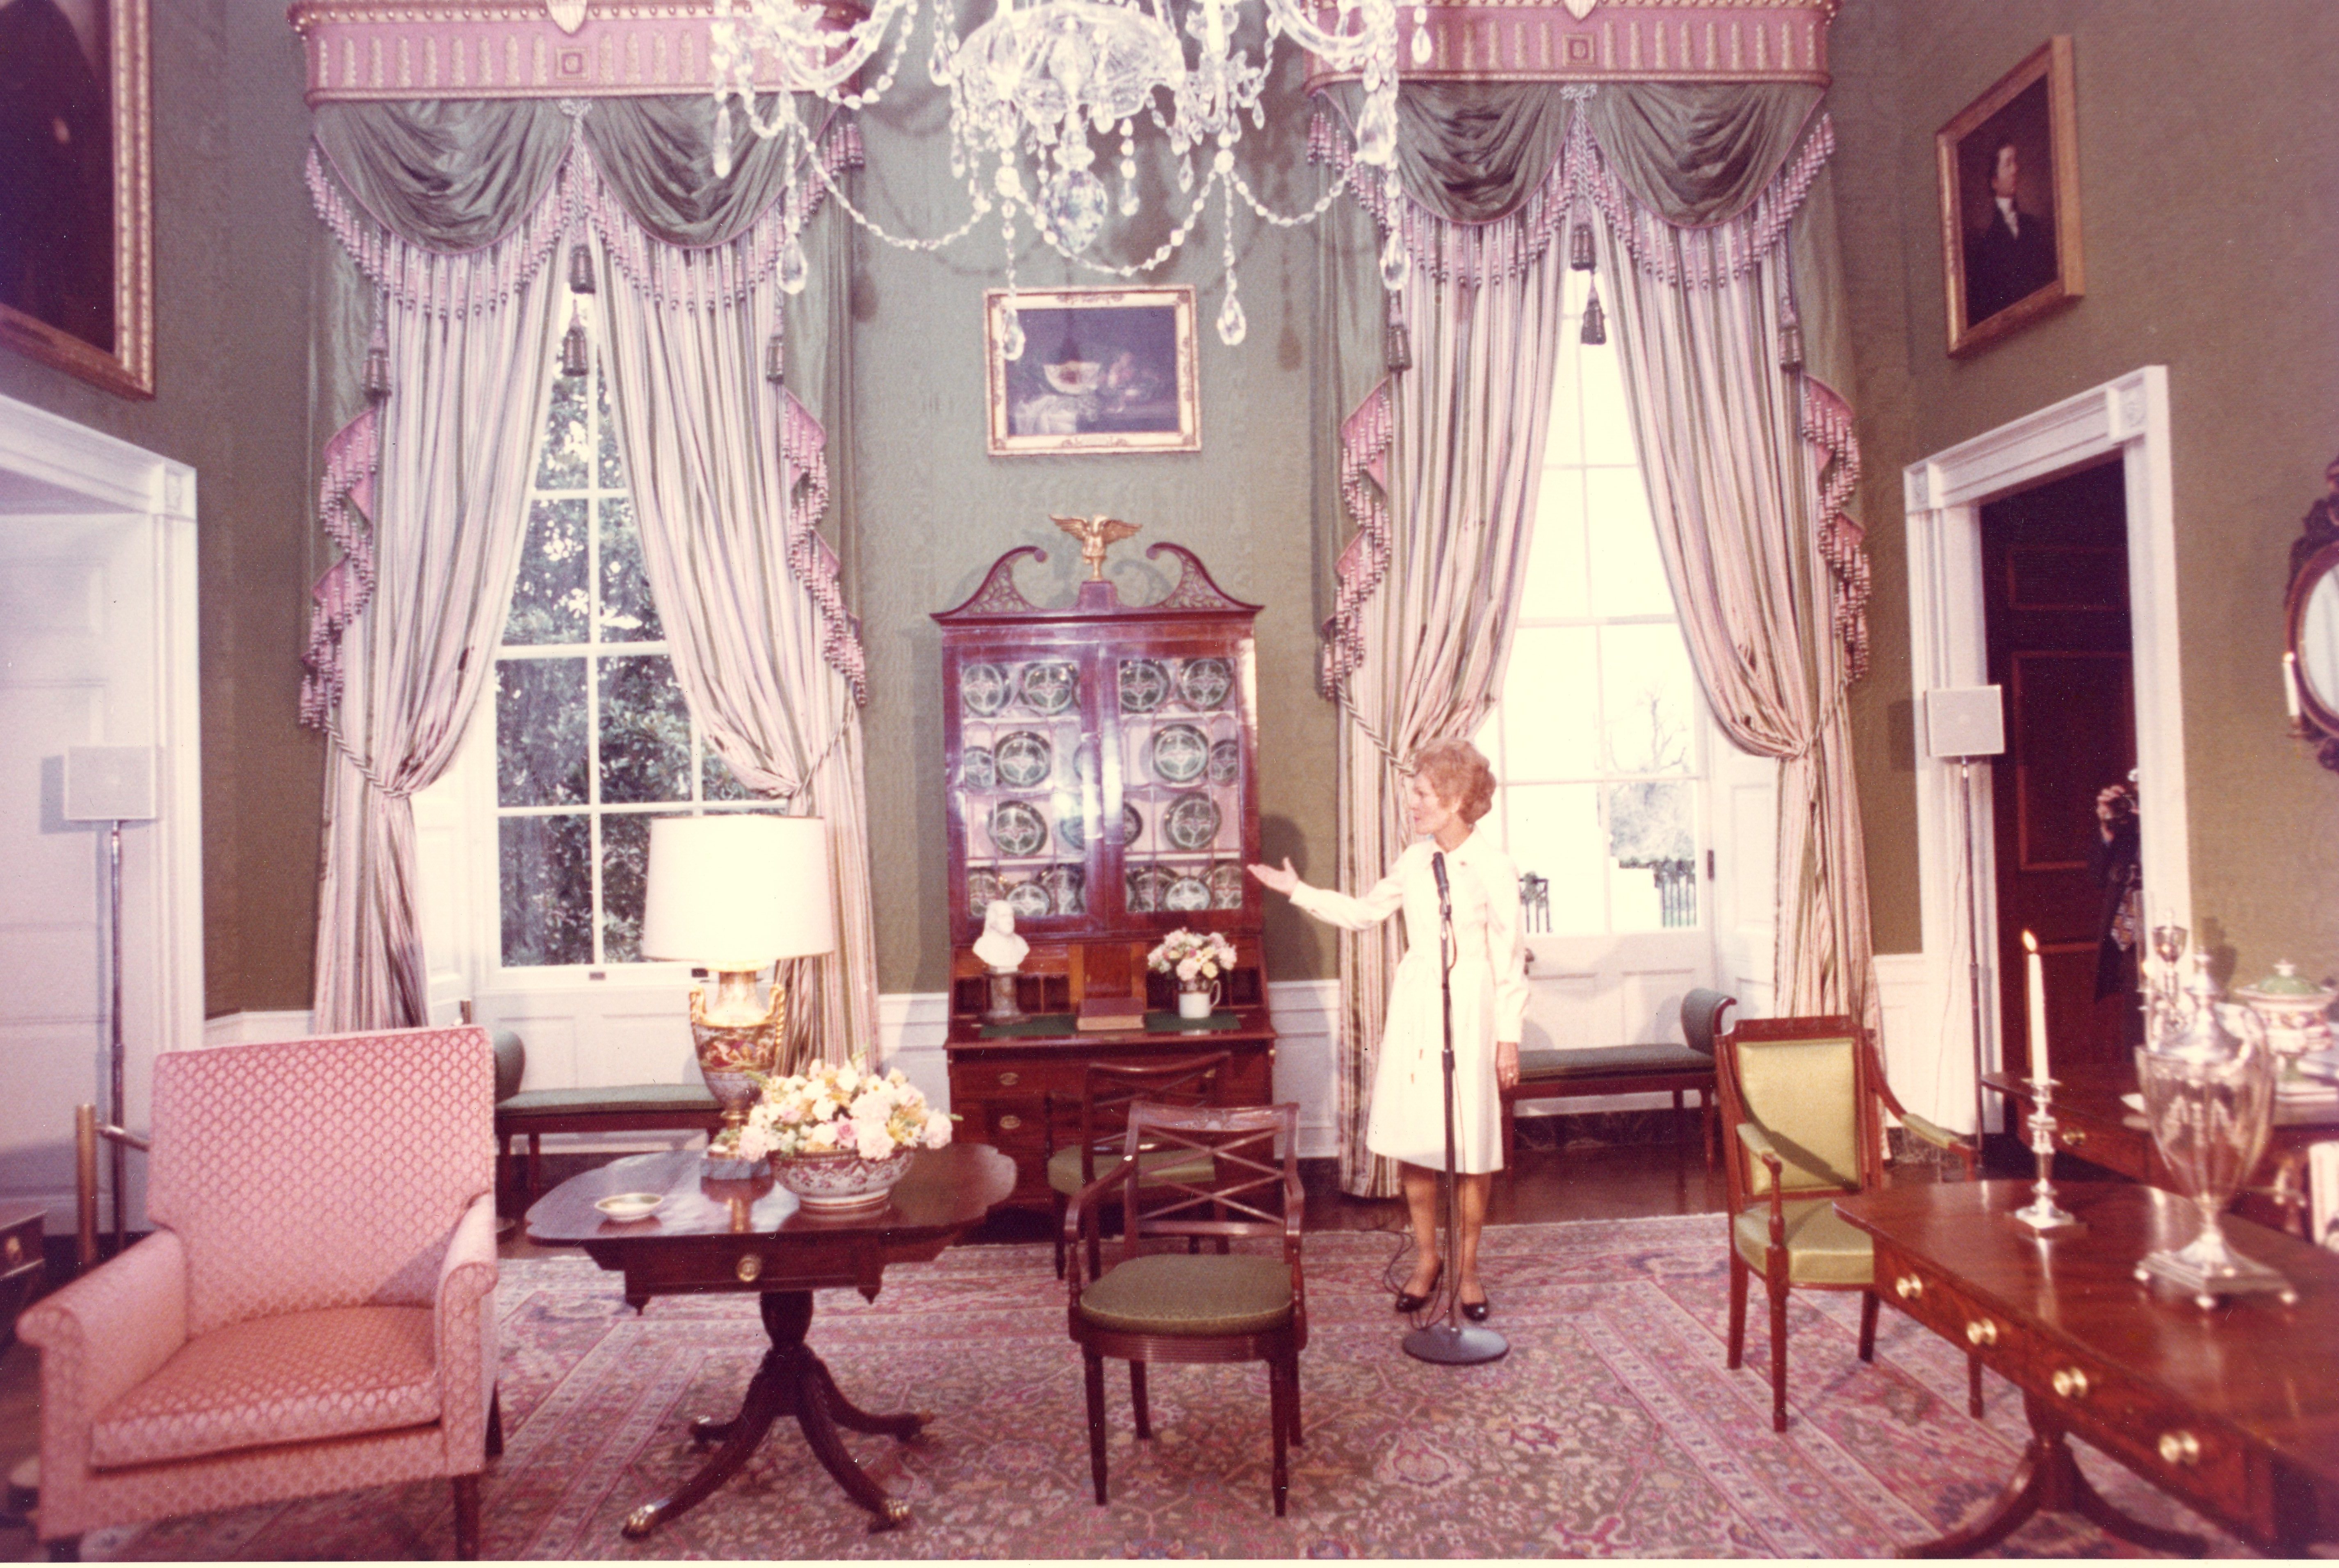 Queen's Sitting Room in White House during Kennedy Administration Photo Print 